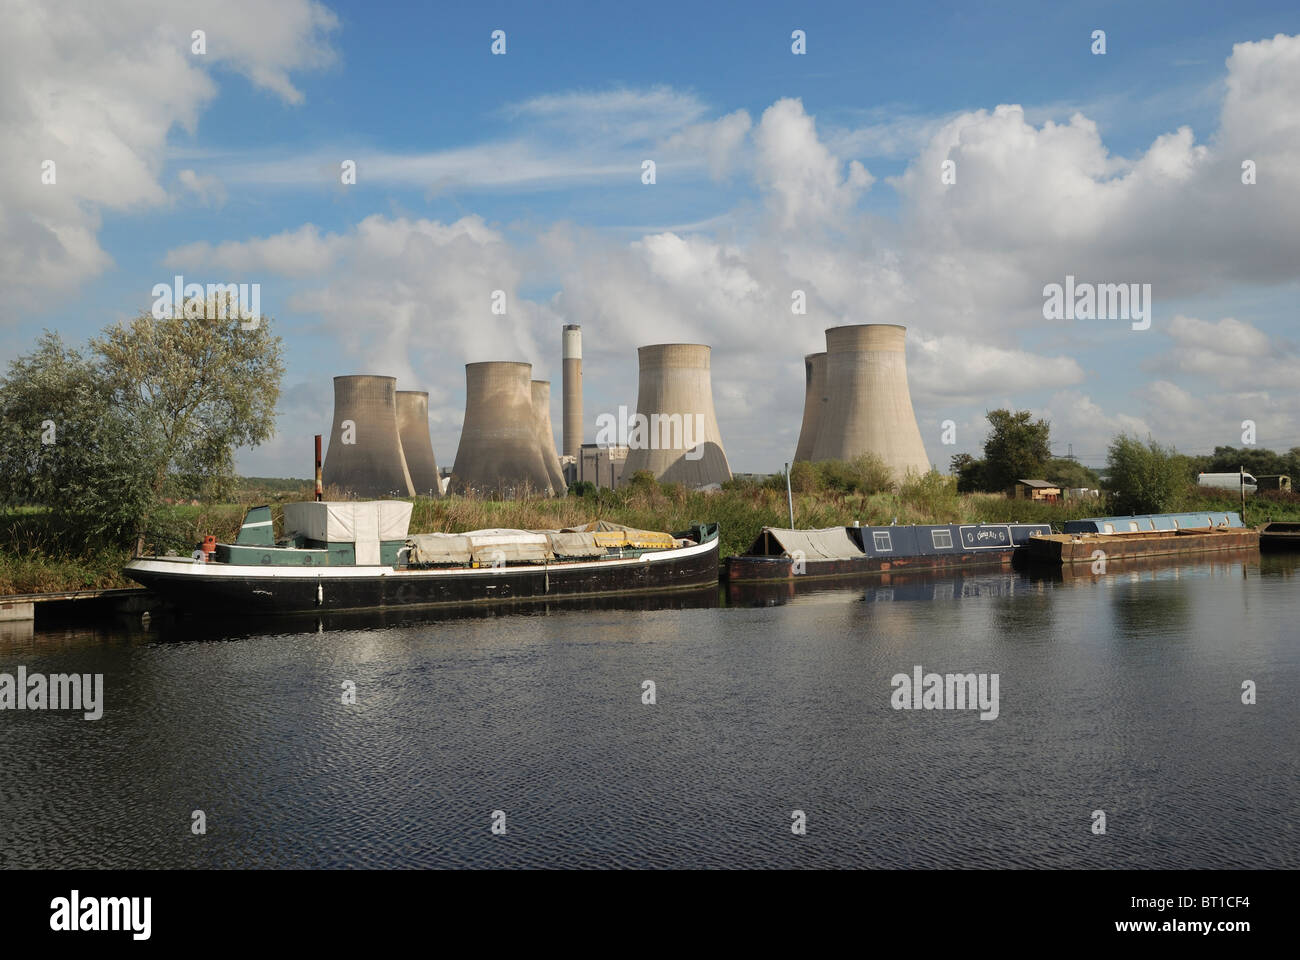 Narrrowboats on the River Soar with the Ratcliffe-on-Soar Power Station in the background. Nottinghamshire, England. Stock Photo